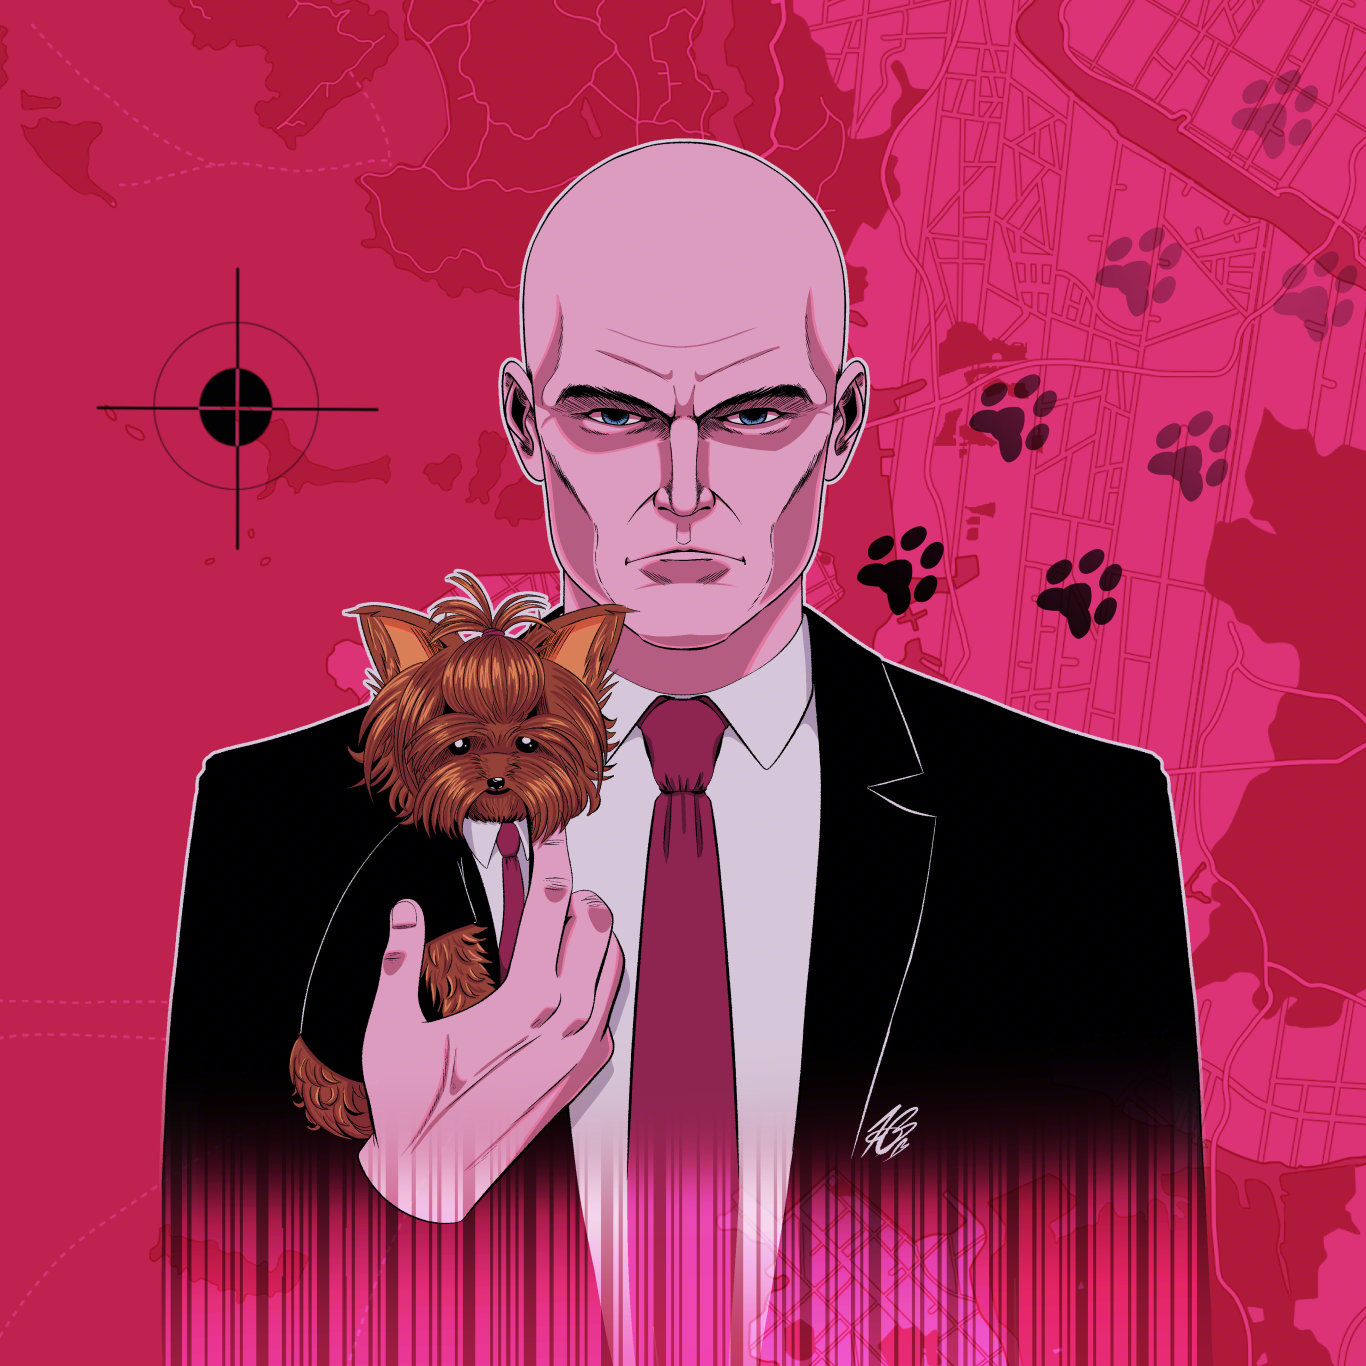 Digital illustration of Agent 47 holding a small Yorkshire Terrier in his hand. The Yorkie has his hair tied up and is in a suit like 47. The background is pinky-red with a map, black paw prints, and a black gun target marker.